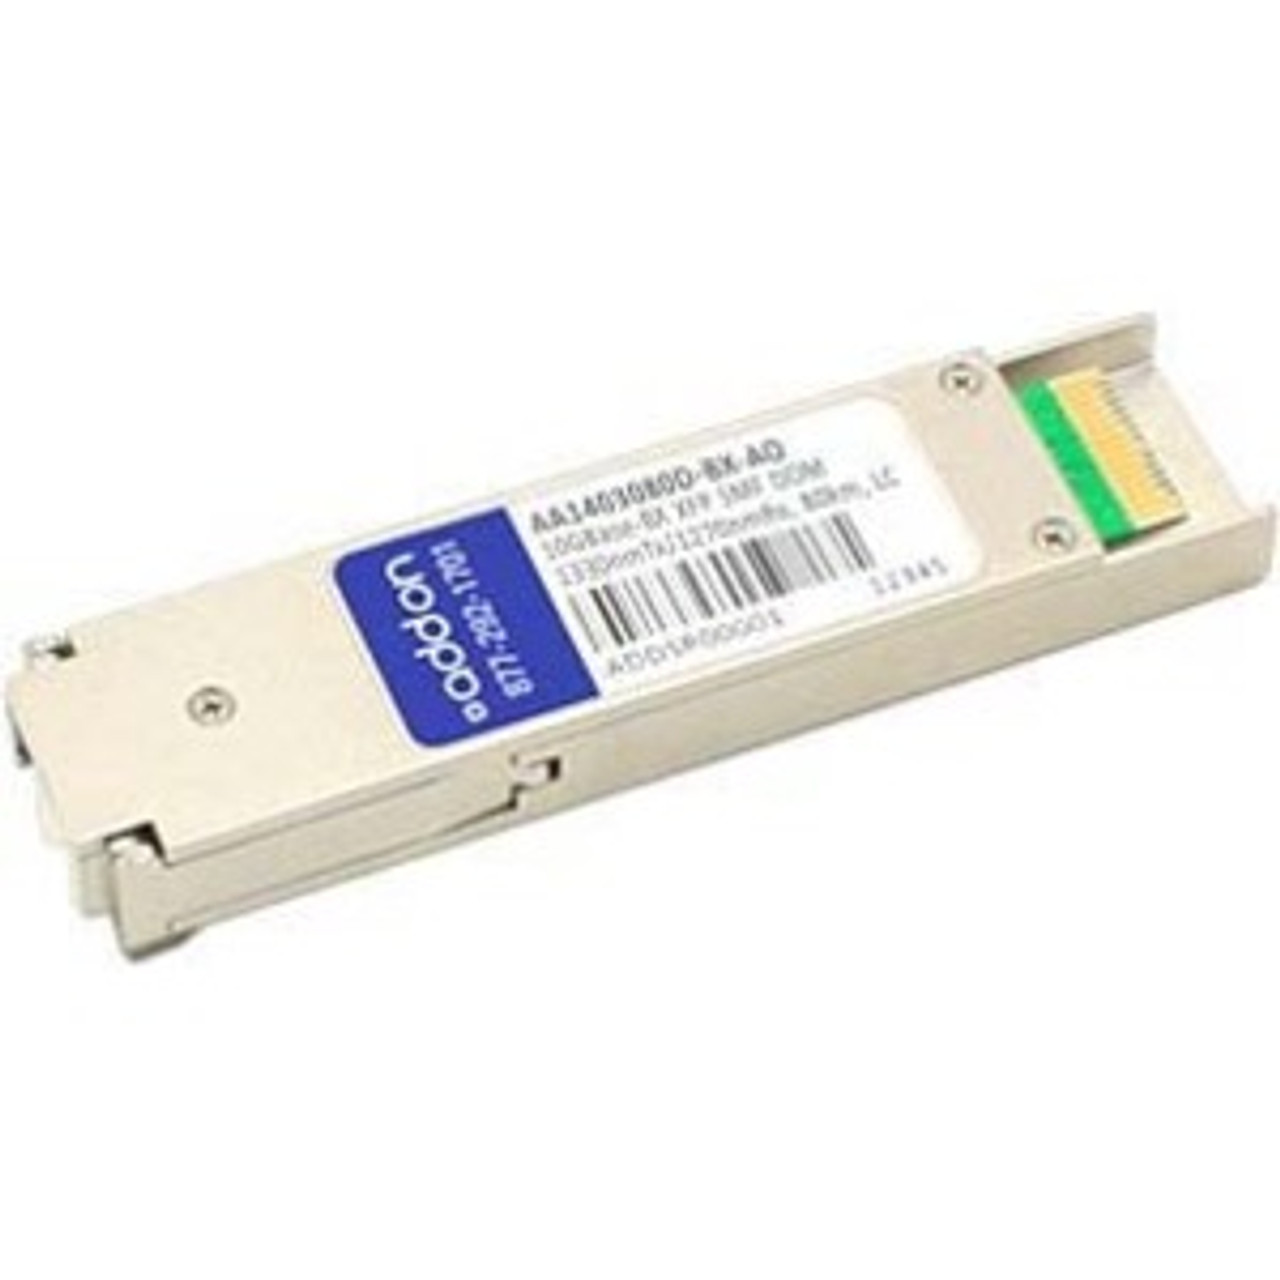 AA1403080D-BX-AO AddOn 10Gbps 10GBase-BX Single-mode Fiber 80km 1550nmTX/1490nmRX LC Connector XFP Transceiver Module for Avaya Compatible